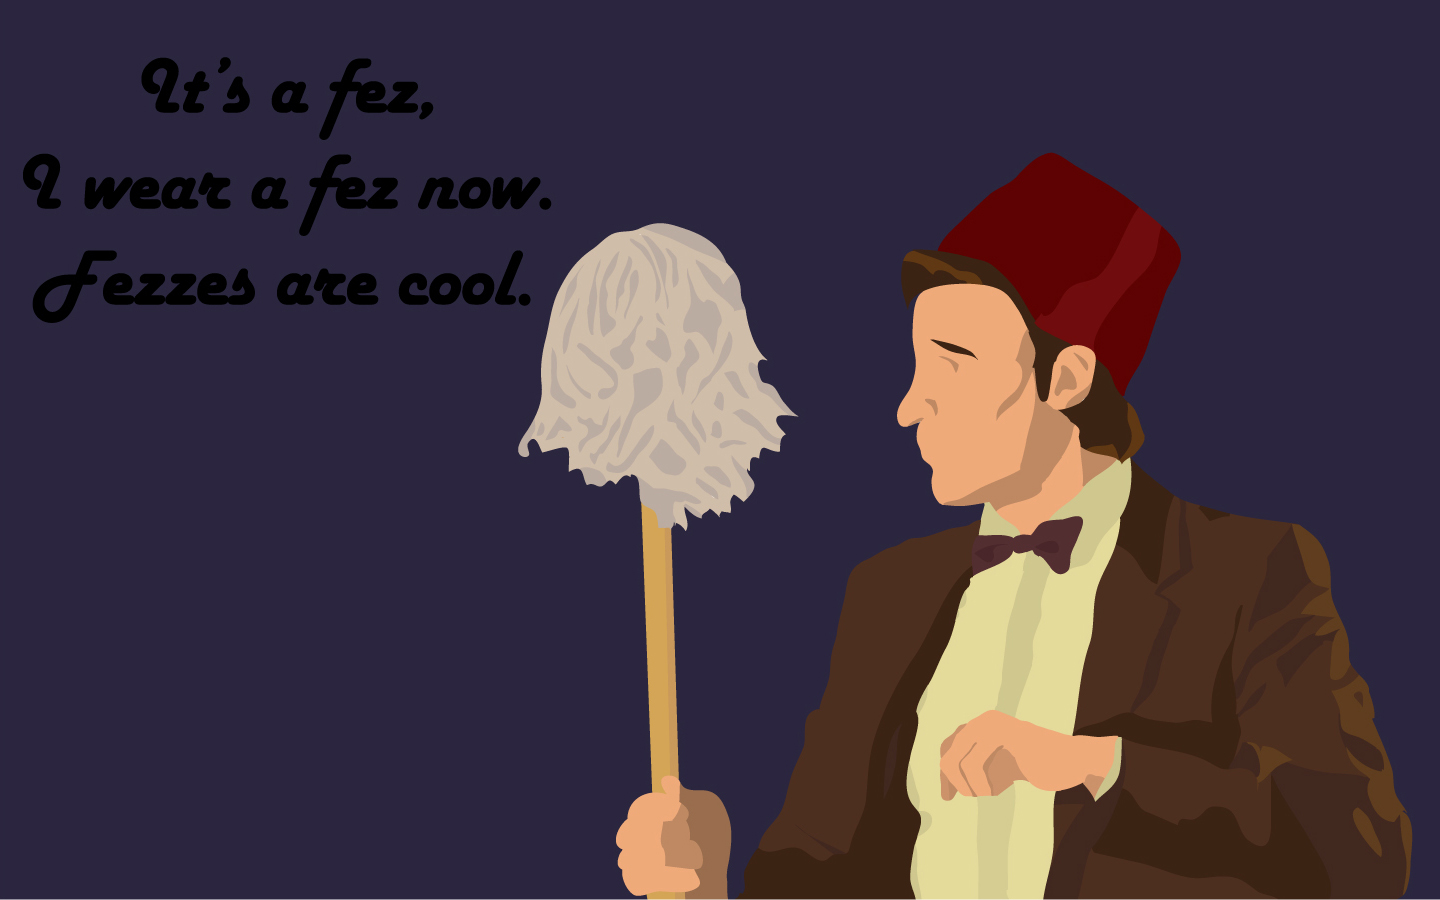 Doctor Who Fez by Rein08 on DeviantArt